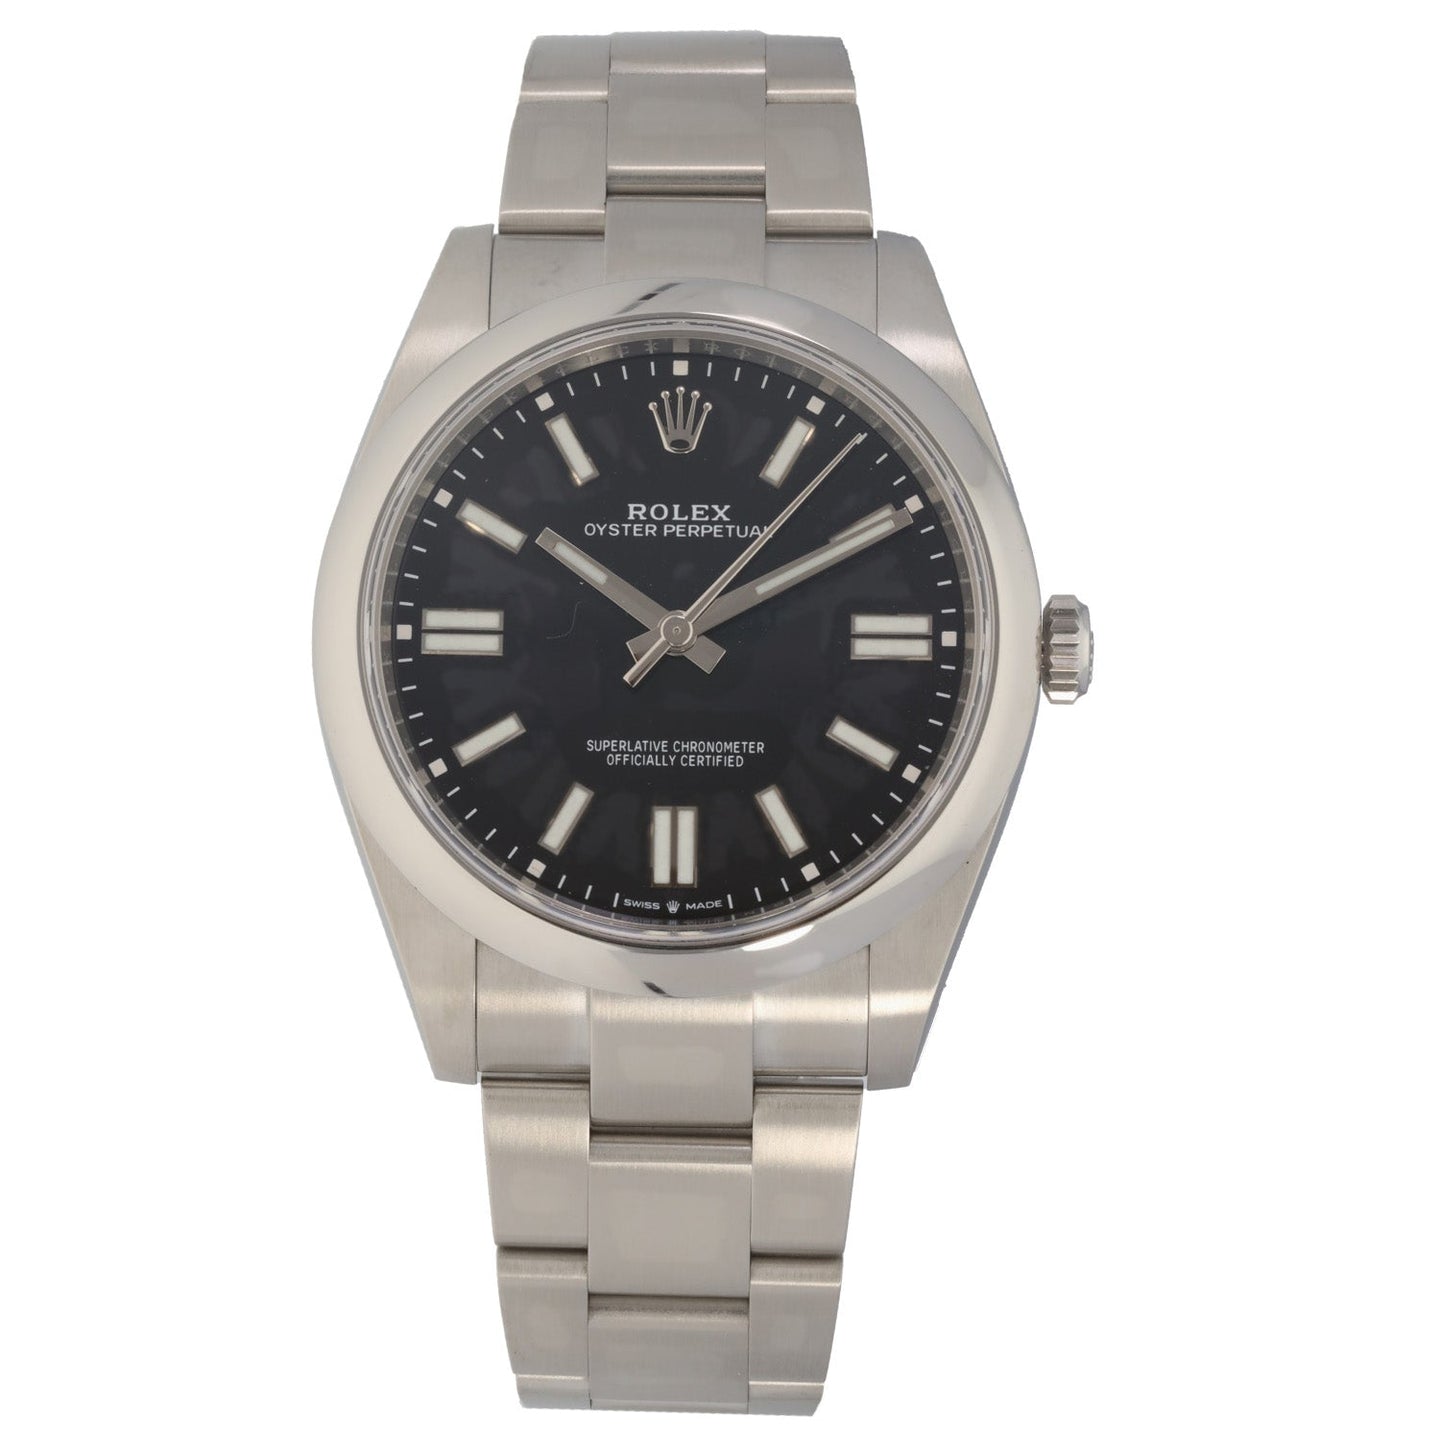 Rolex Oyster Perpetual 124300 41mm Stainless Steel Watch